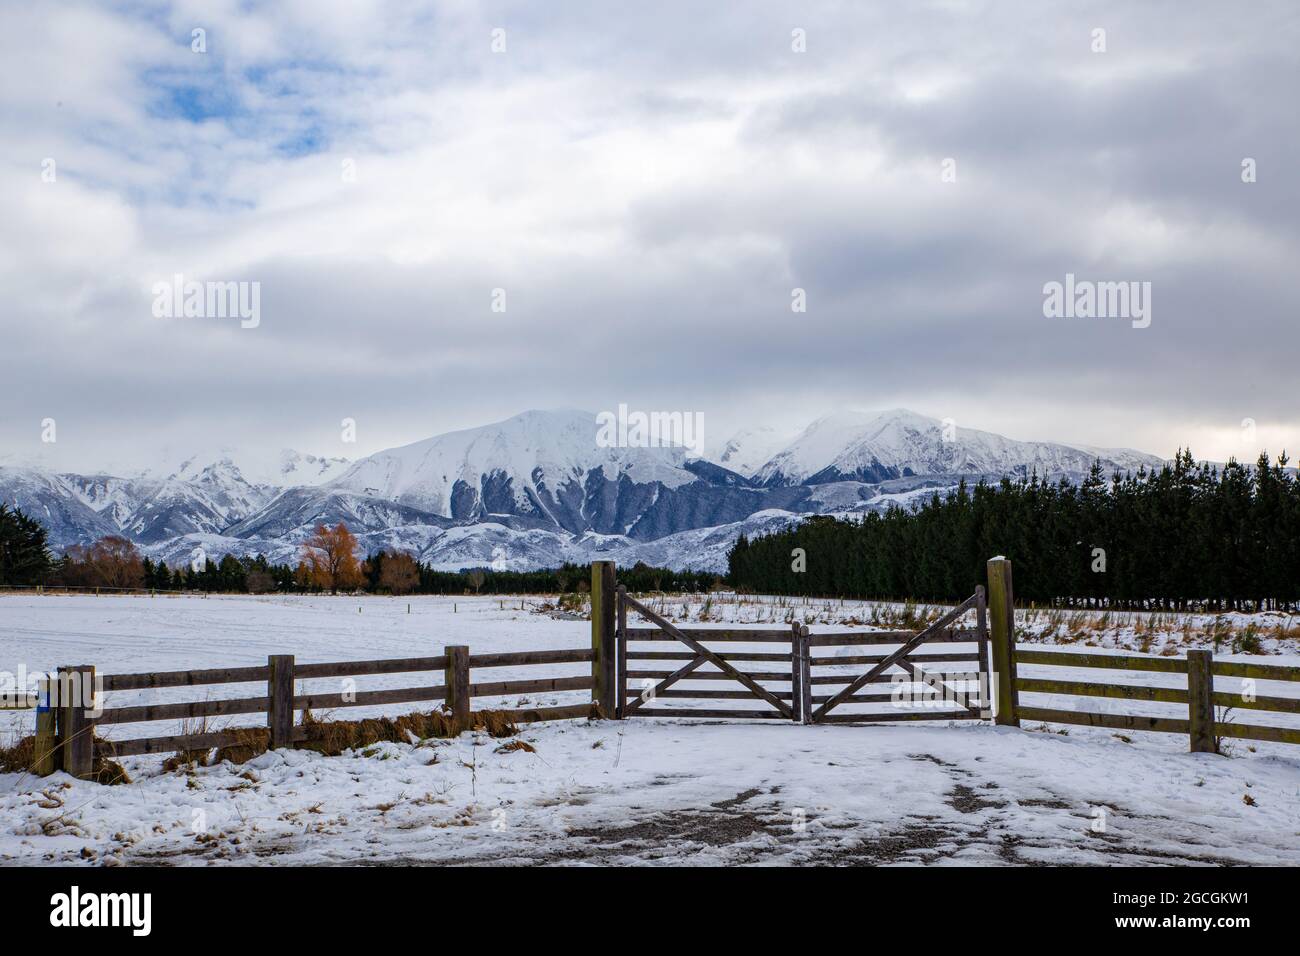 The morning after a snow fall looking out over rural farm land, foothills and mountains with a wooden farm fence, Springfield, Canterbury, New Zealand Stock Photo